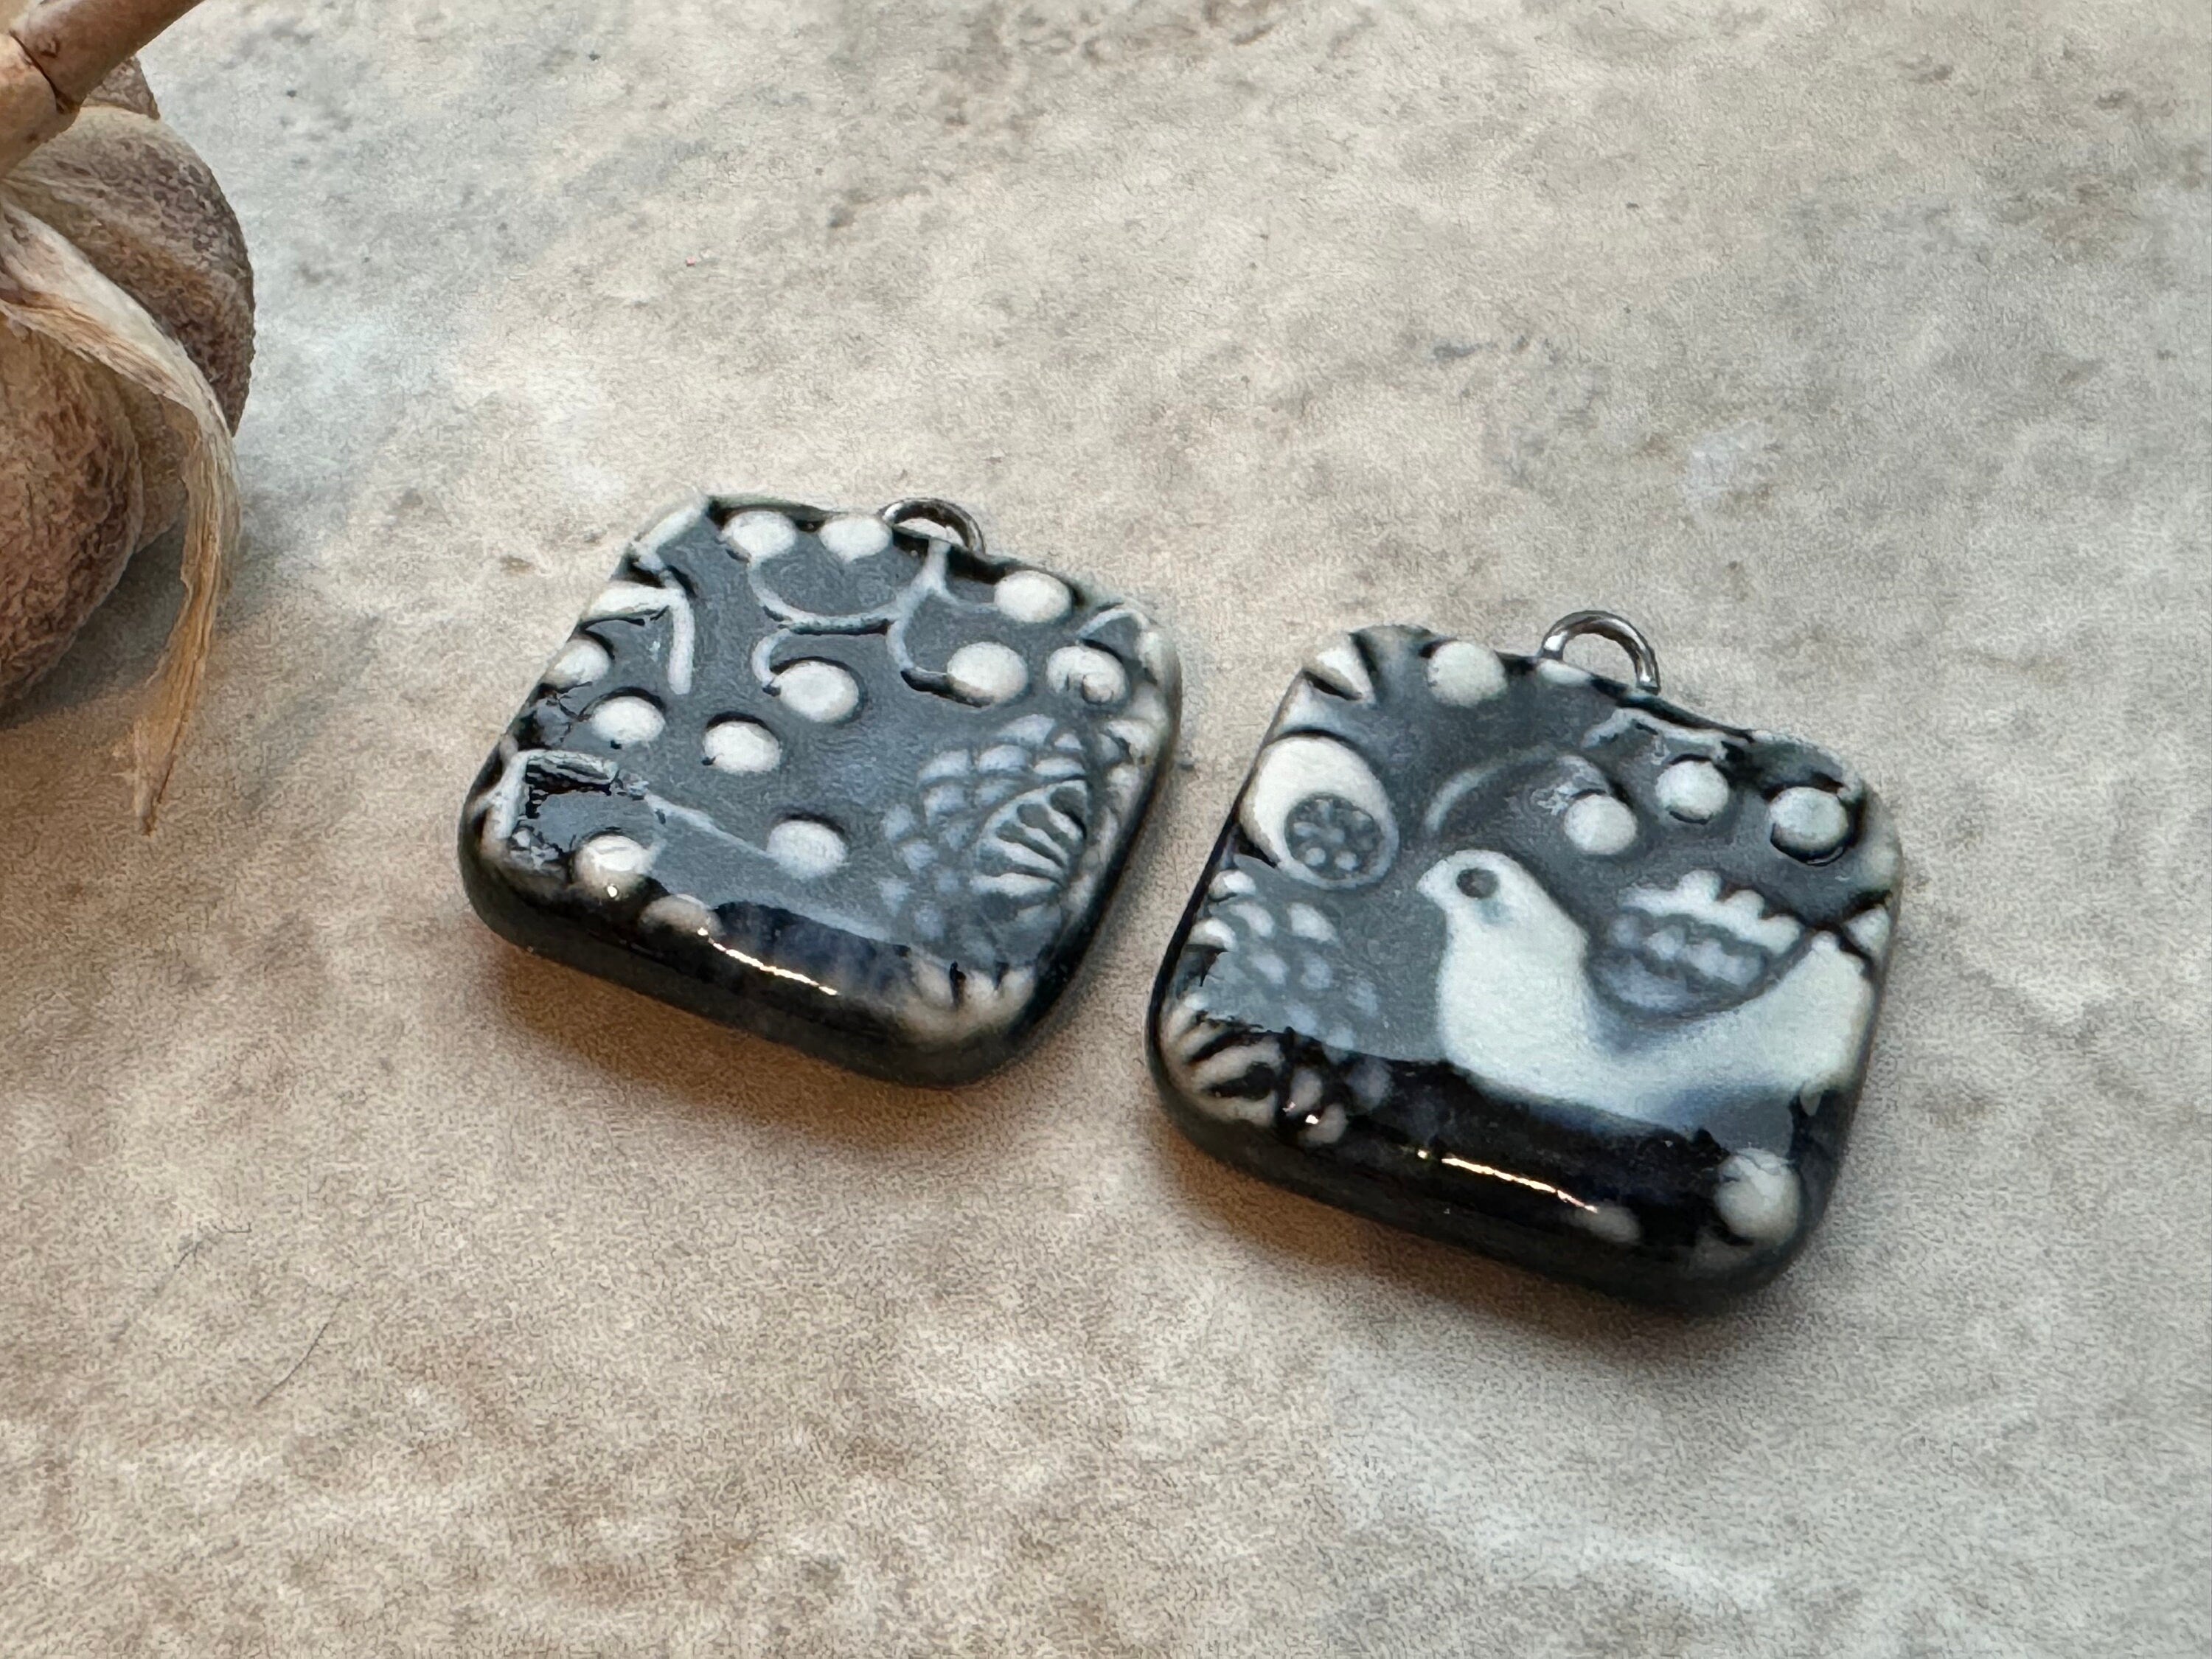 Black and White Charms, Scandinavian Bird and Rosette, Black Earring Bead Pair, Porcelain Ceramic Charms, Jewelry Components, Handmade